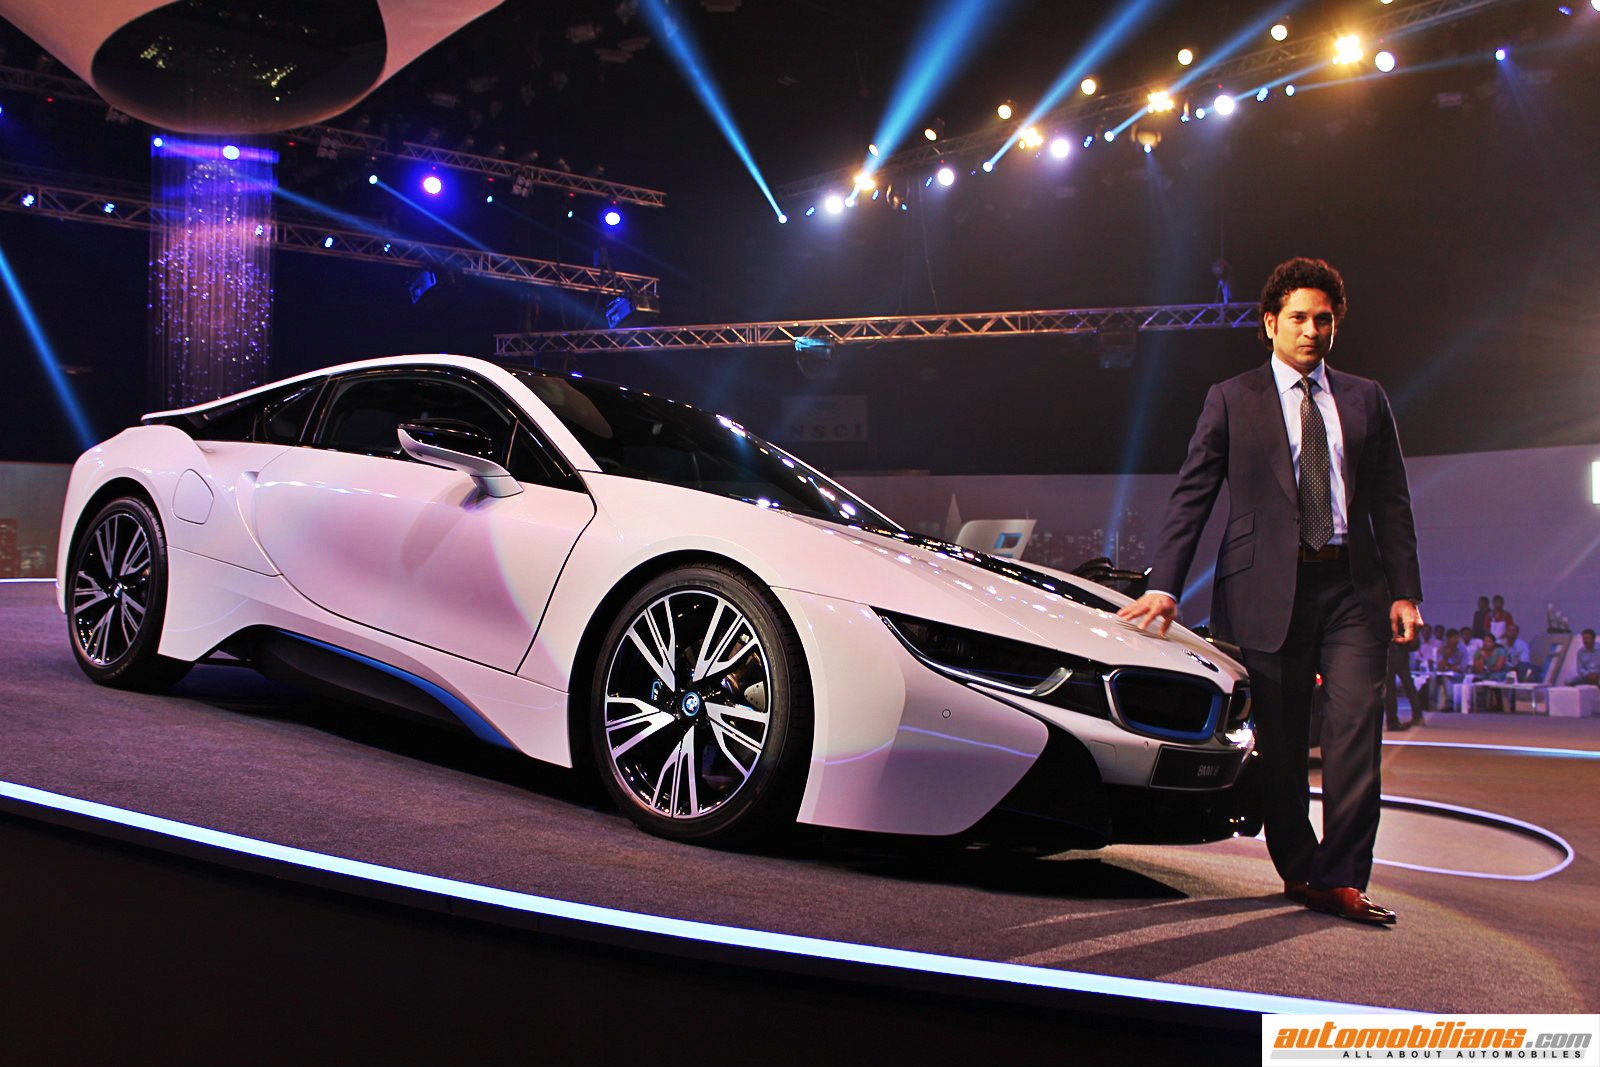 BMW i8 Launched in India at Rs. 2.29 Crores (Ex-Showroom, India)